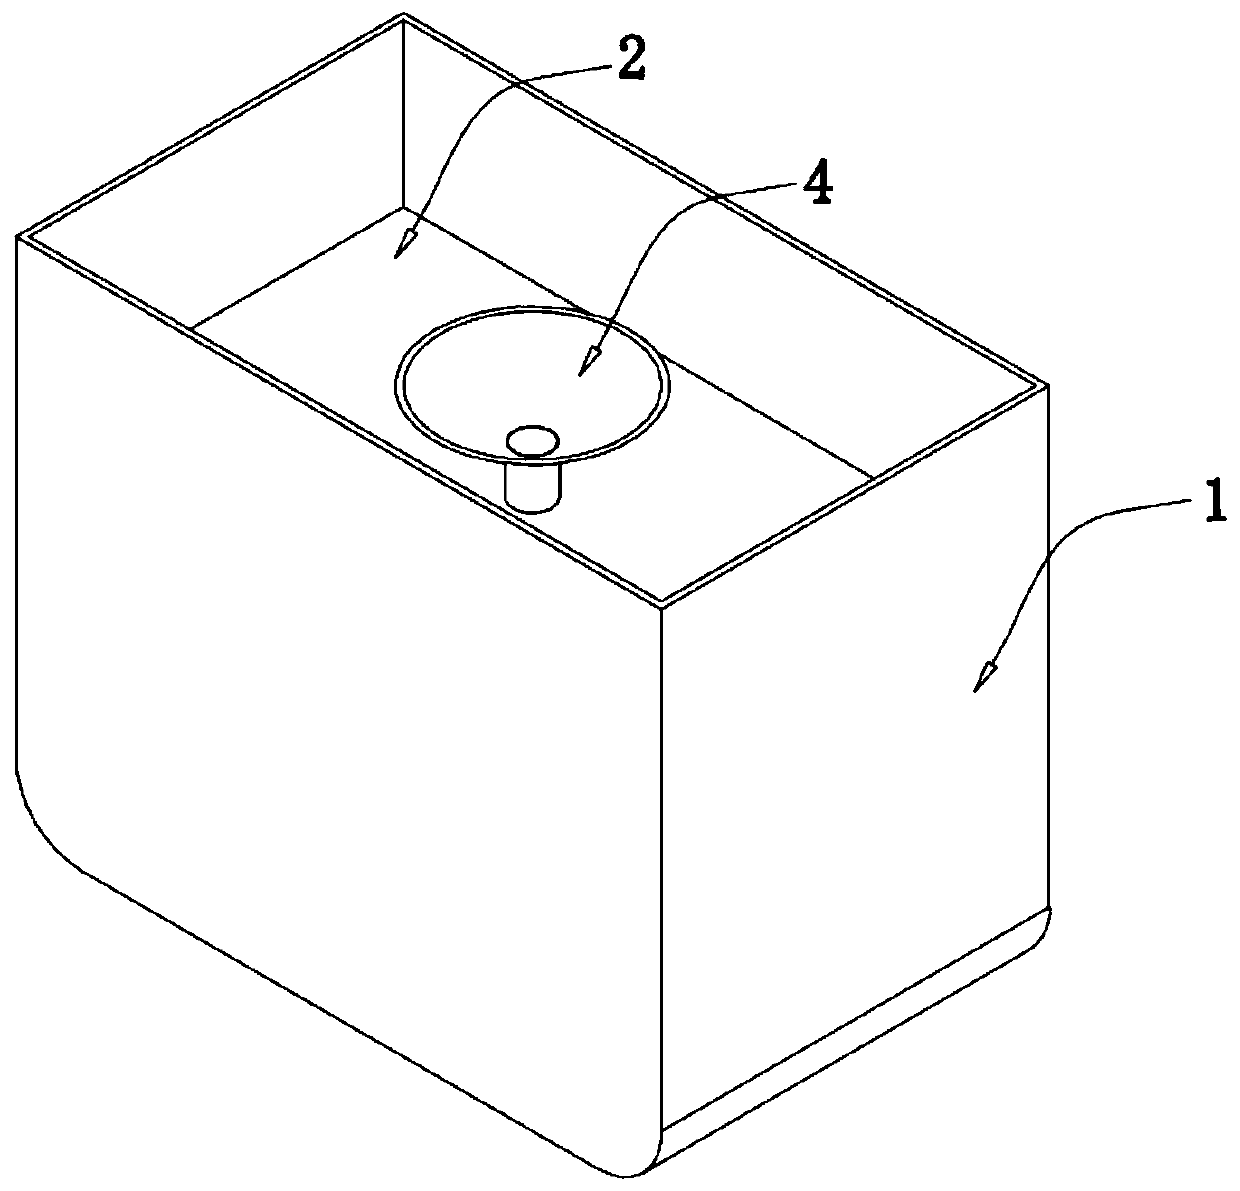 Method for trapping coccinella septempunctata for oviposition